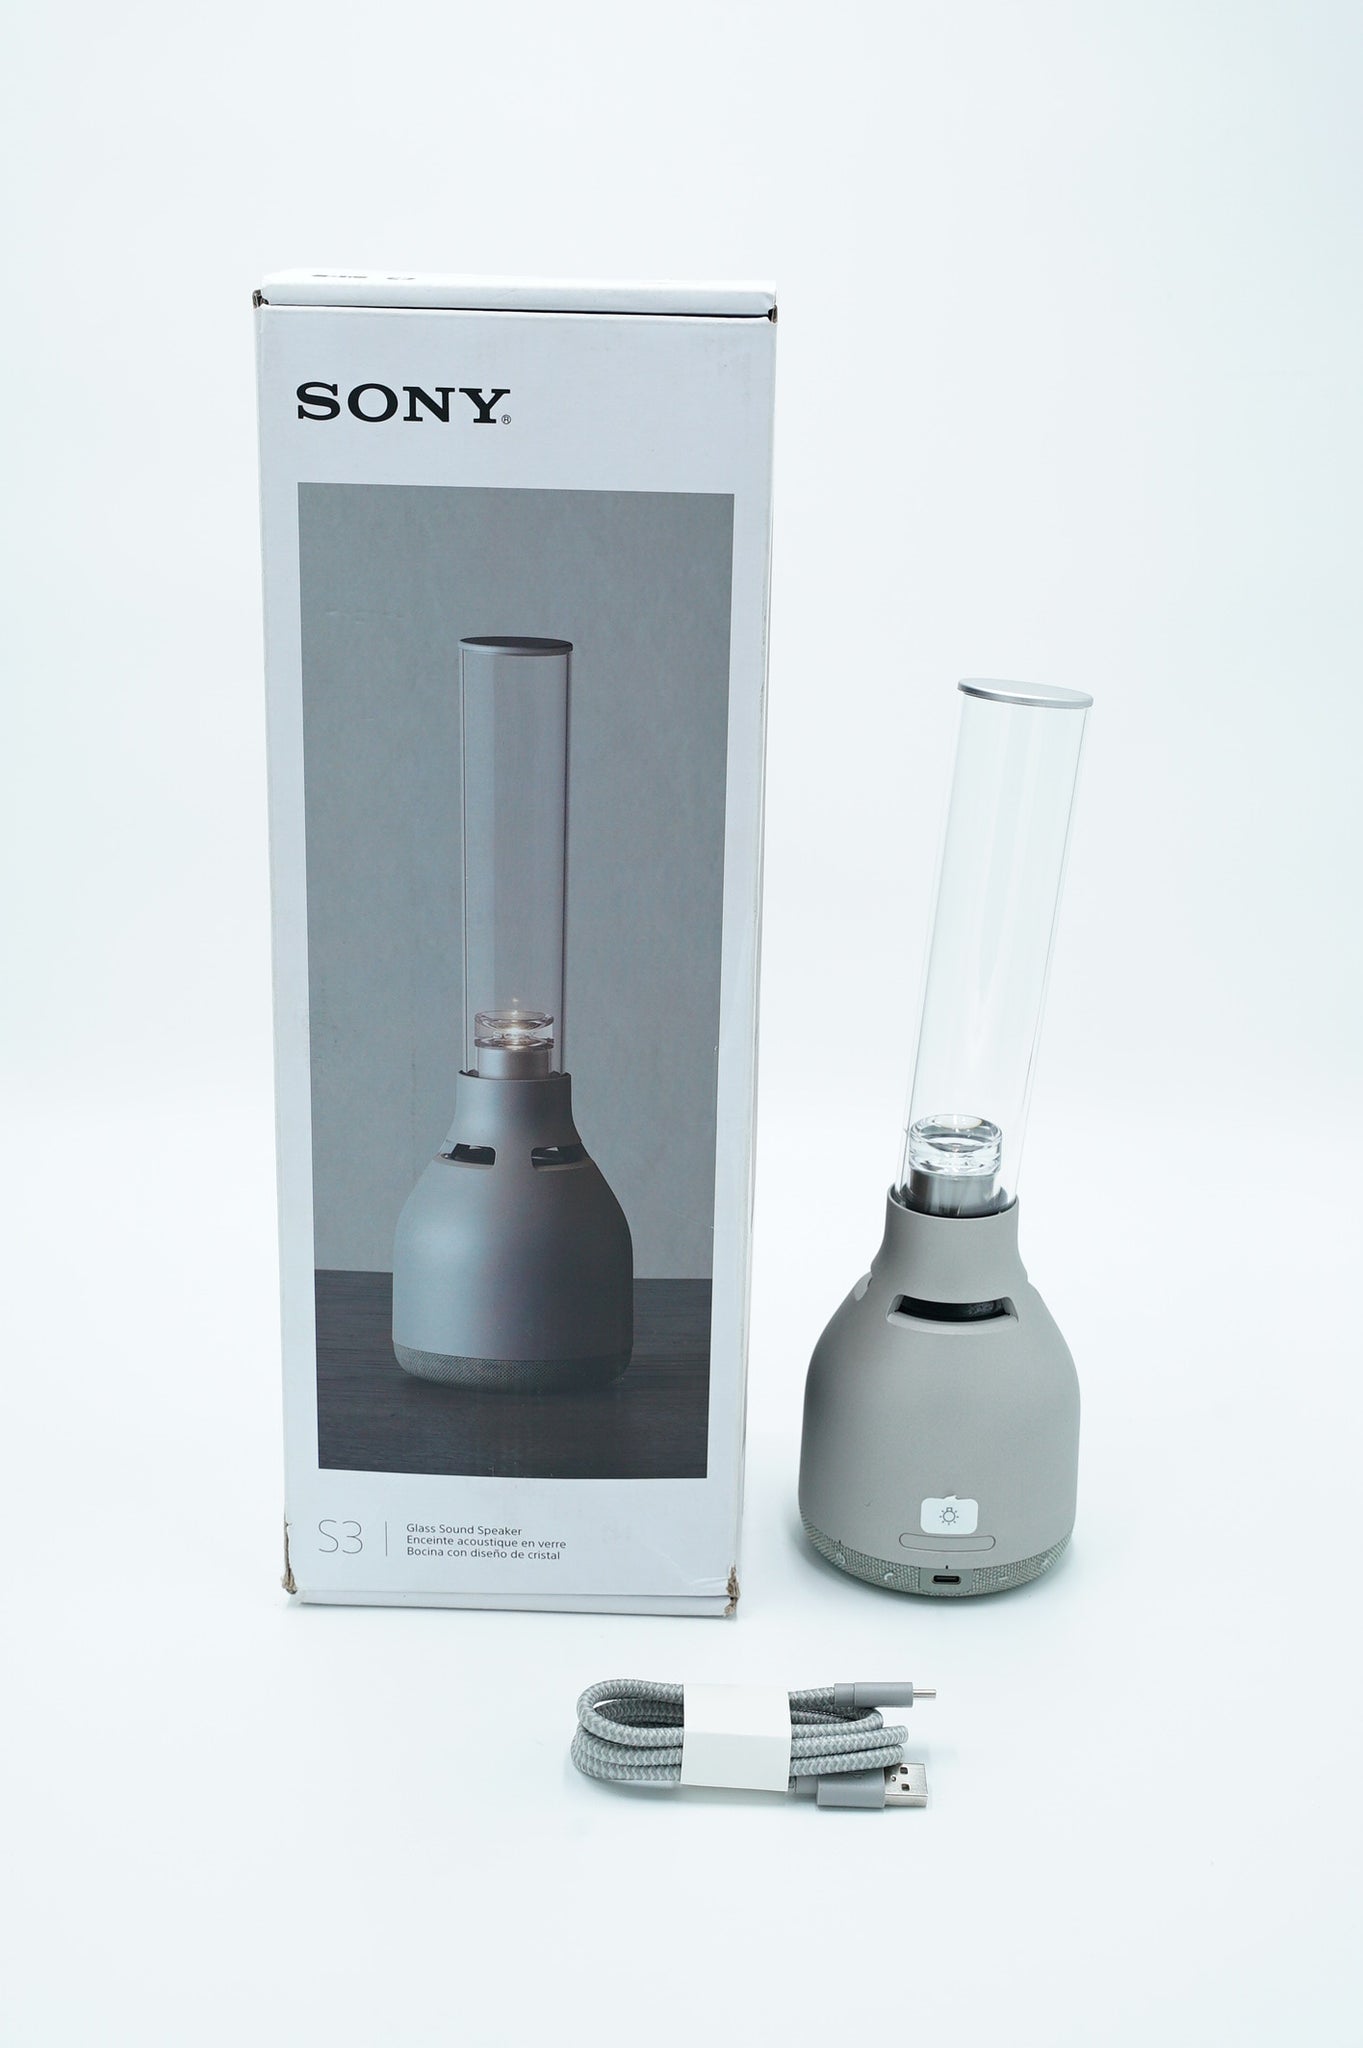 Sony LSPXS3/1000690 Glass Sound 360º All Directional Speaker w/Candle-Like LED Illumination, 8 Hour Battery, and Bluetooth, Off/White, Used